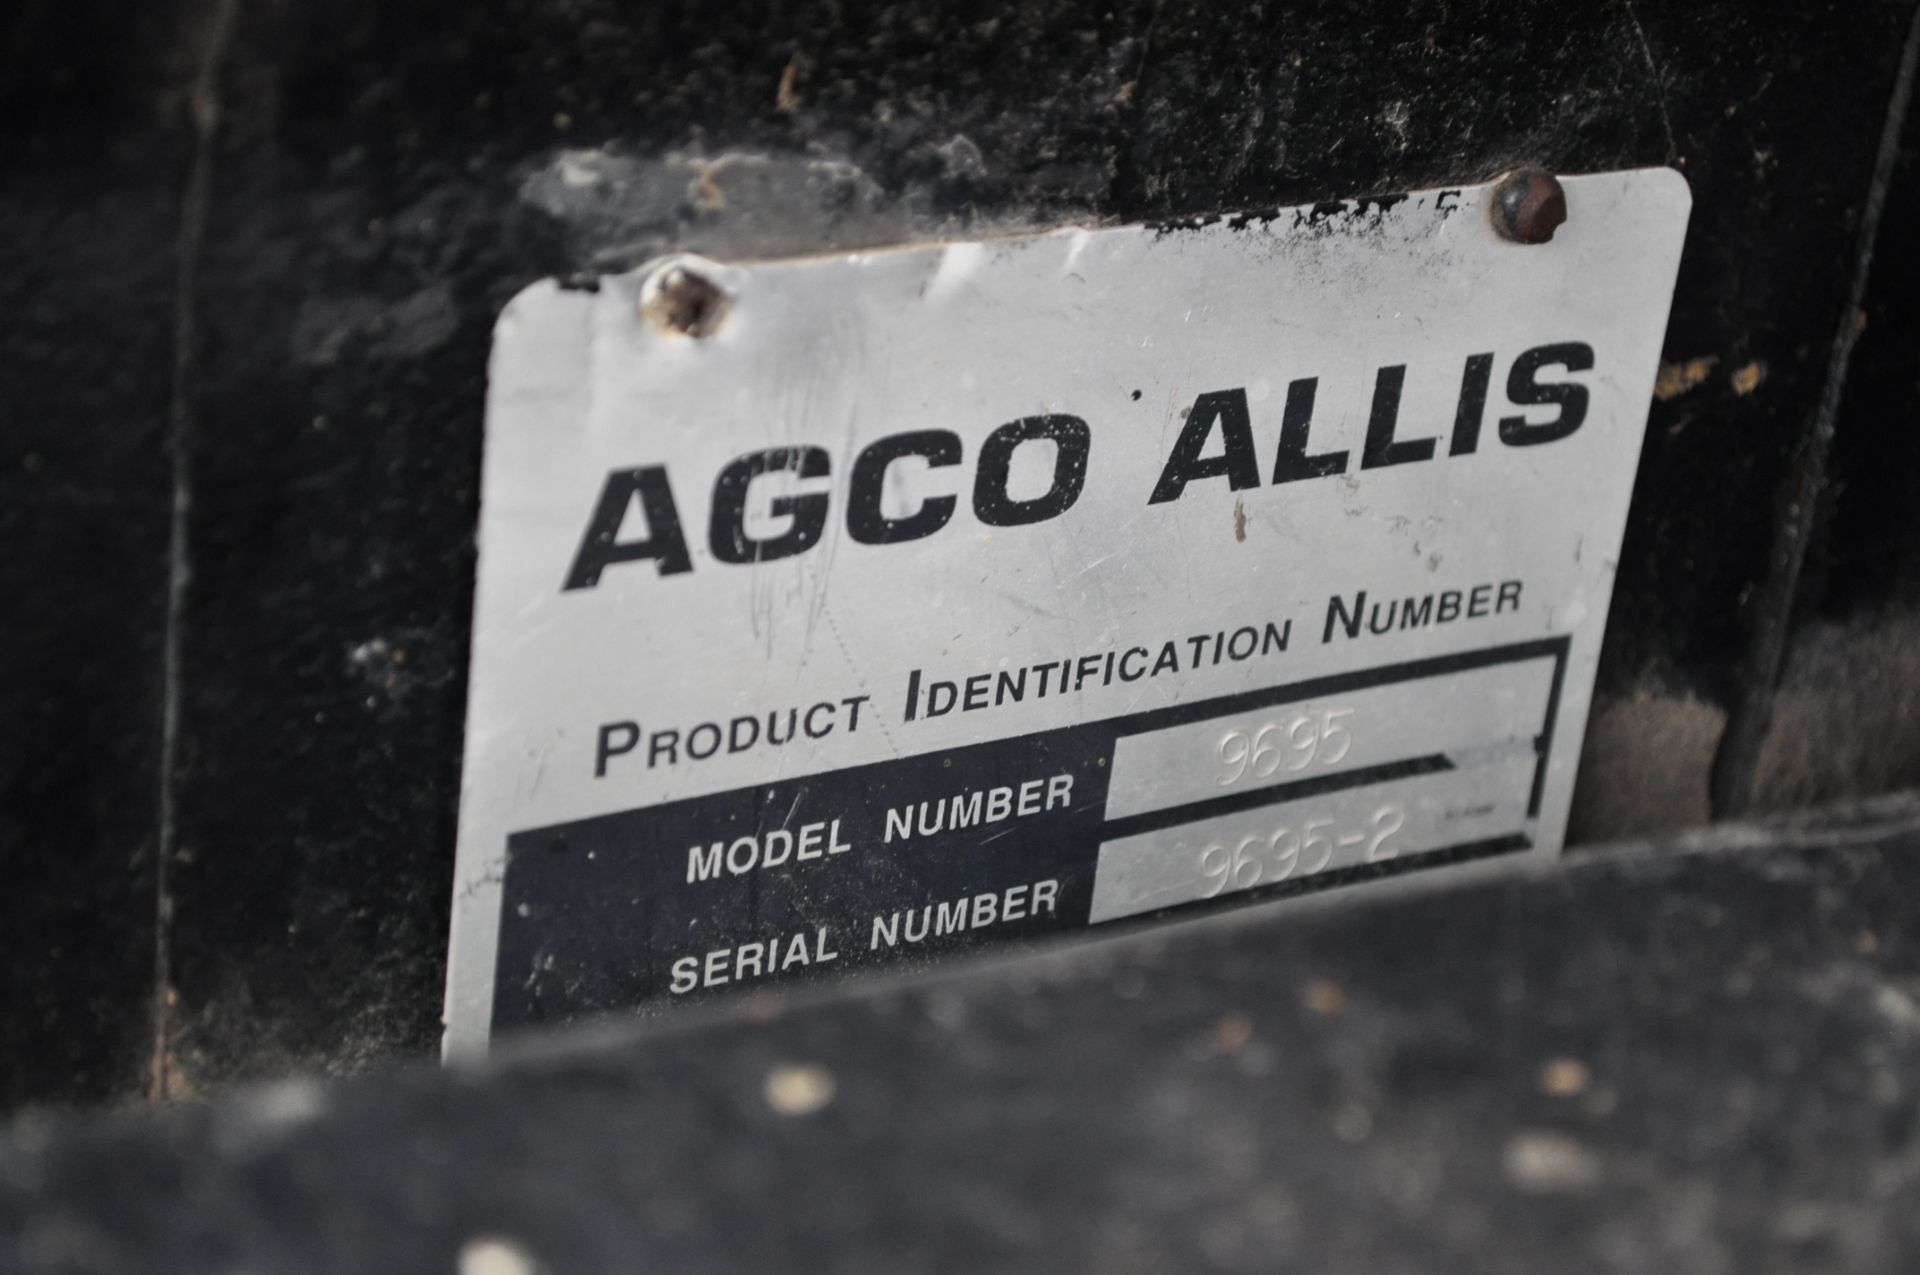 Agco Allis 9695 MFWD tractor, 520/85 R 42 rear duals, 420/90 R 30 front duals, fenders, frt wts, 3 - Image 14 of 18